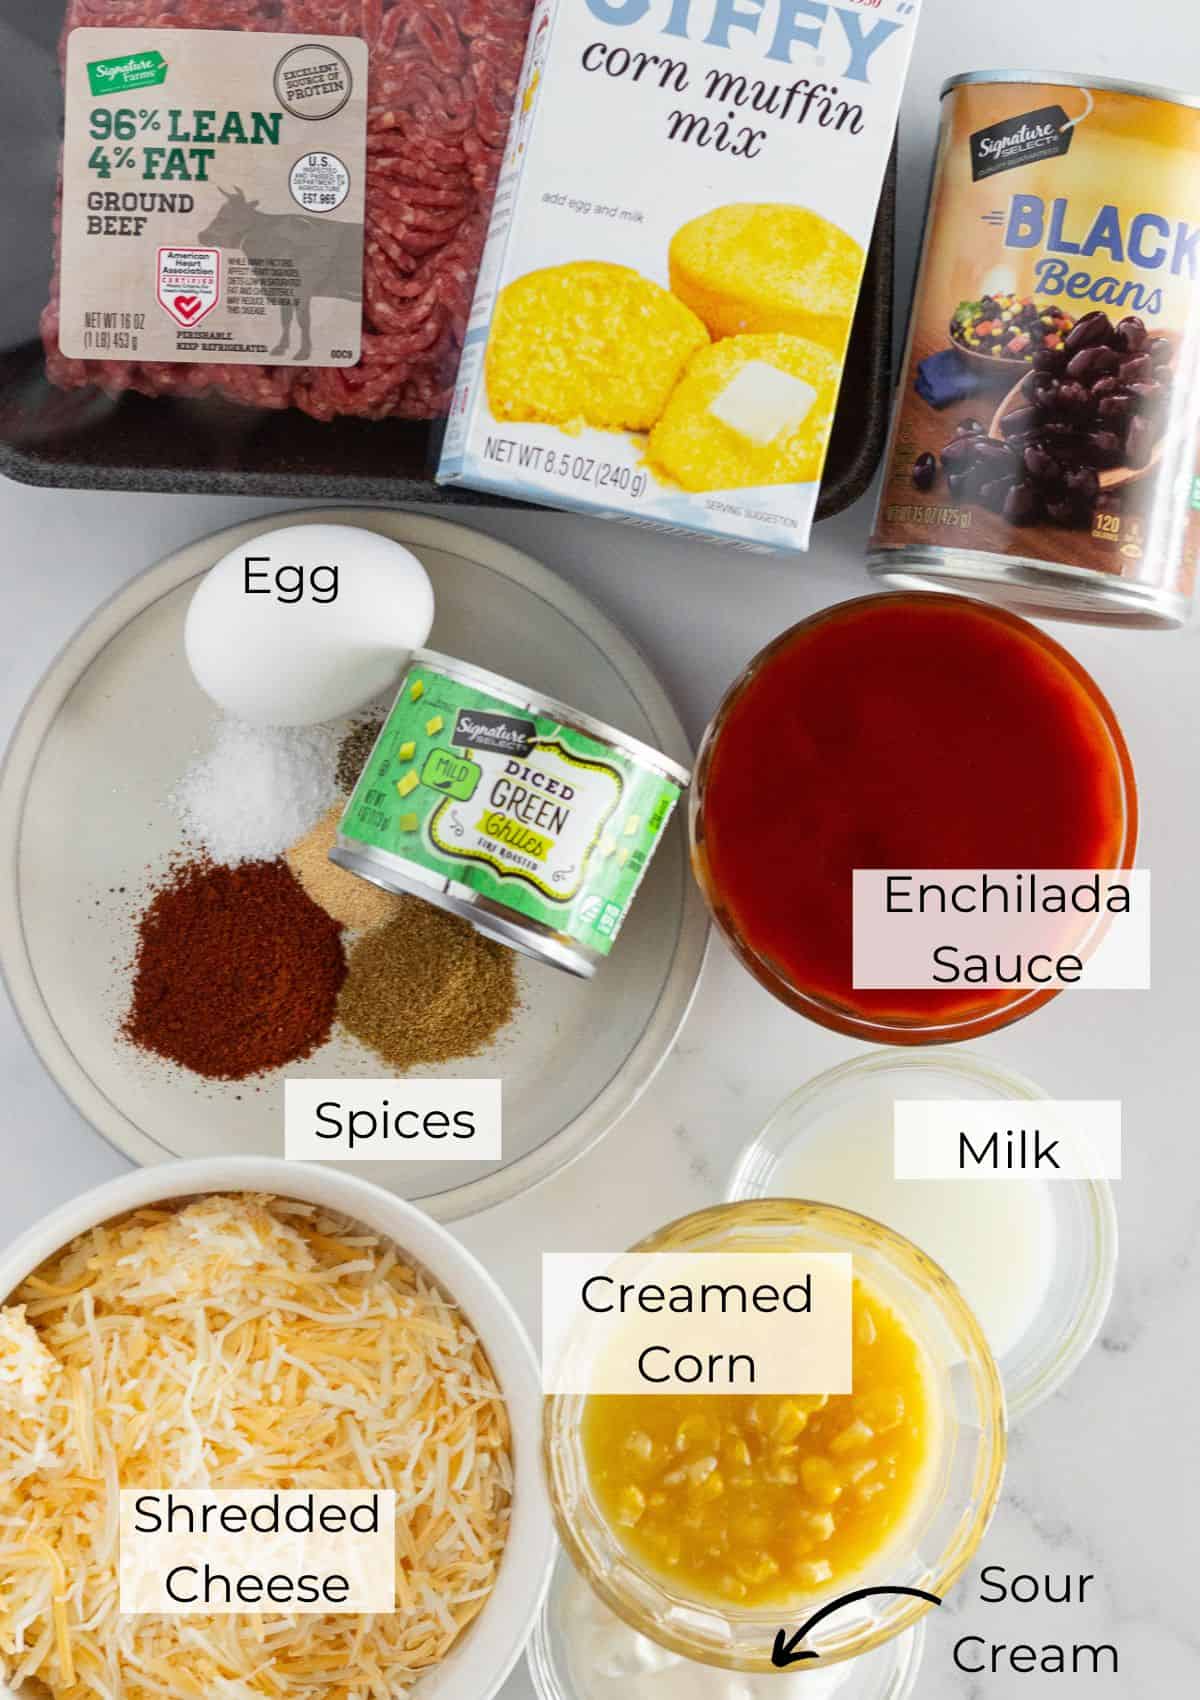 The ingredients needed to make tamale pie with Jiffy corn muffin mix.